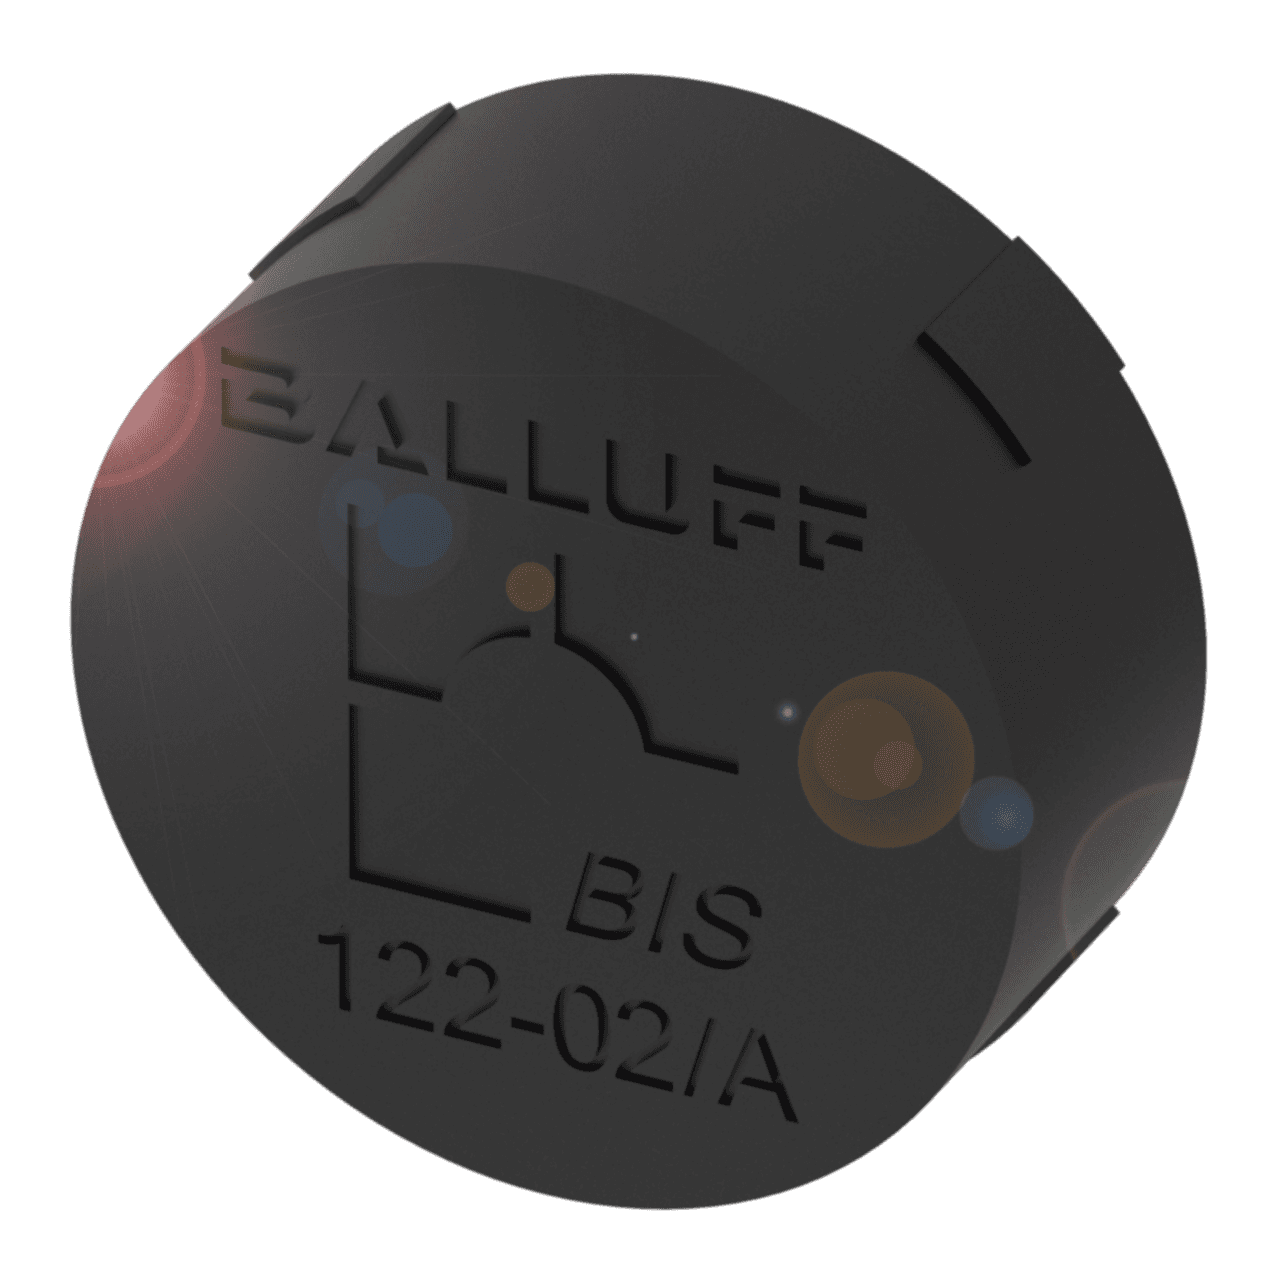 Balluff BIS0015 LF data carriers (70/455 kHz), Product Group: LF (70/455 kHz), Dimension: Ø 10 x 4.5 mm, Antenna type: round, Memory type: EEPROM, User data, read/write: 2047 Byte, Storage temperature: -30...85 °C, Storage temperature temporary: 120 °C 1x700 h